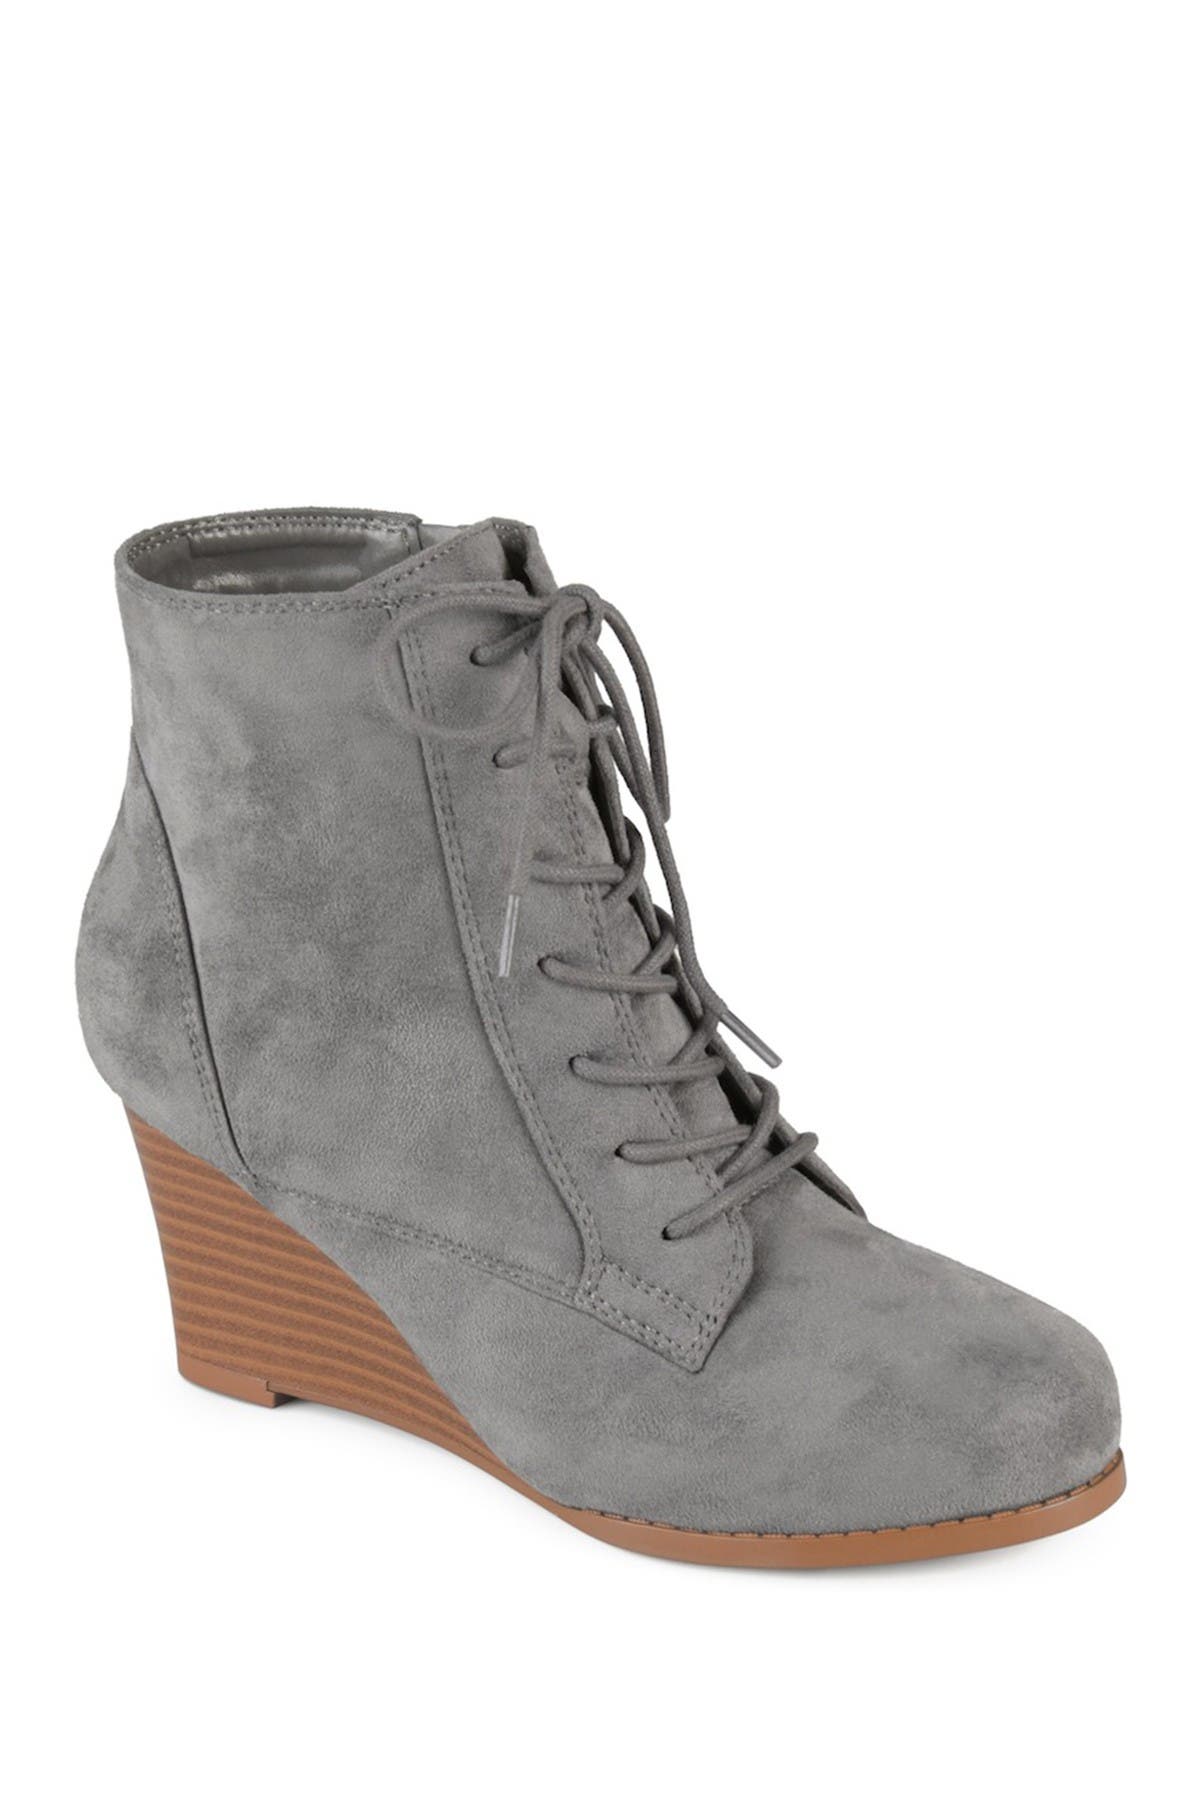 lace up wedge boot